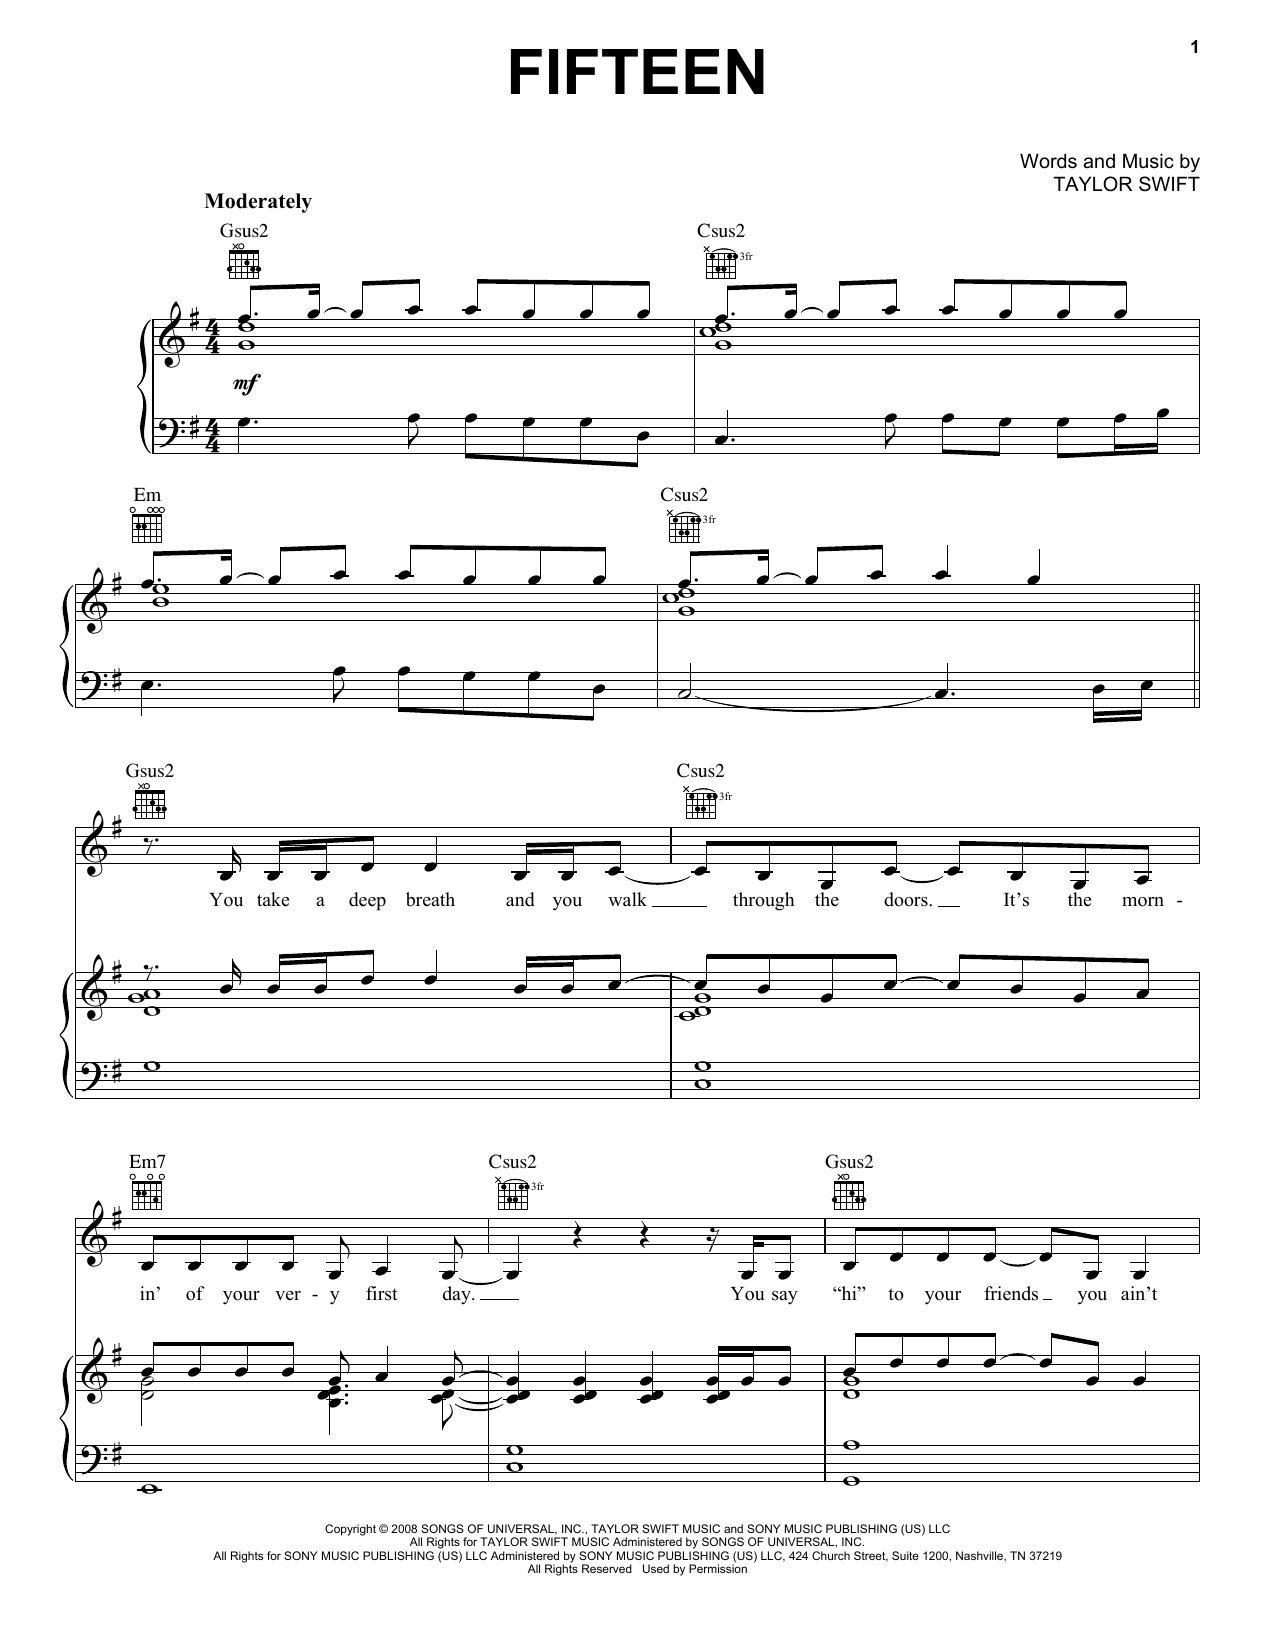 Taylor Swift Fifteen sheet music preview music notes and score for Ukulele including 5 page(s)